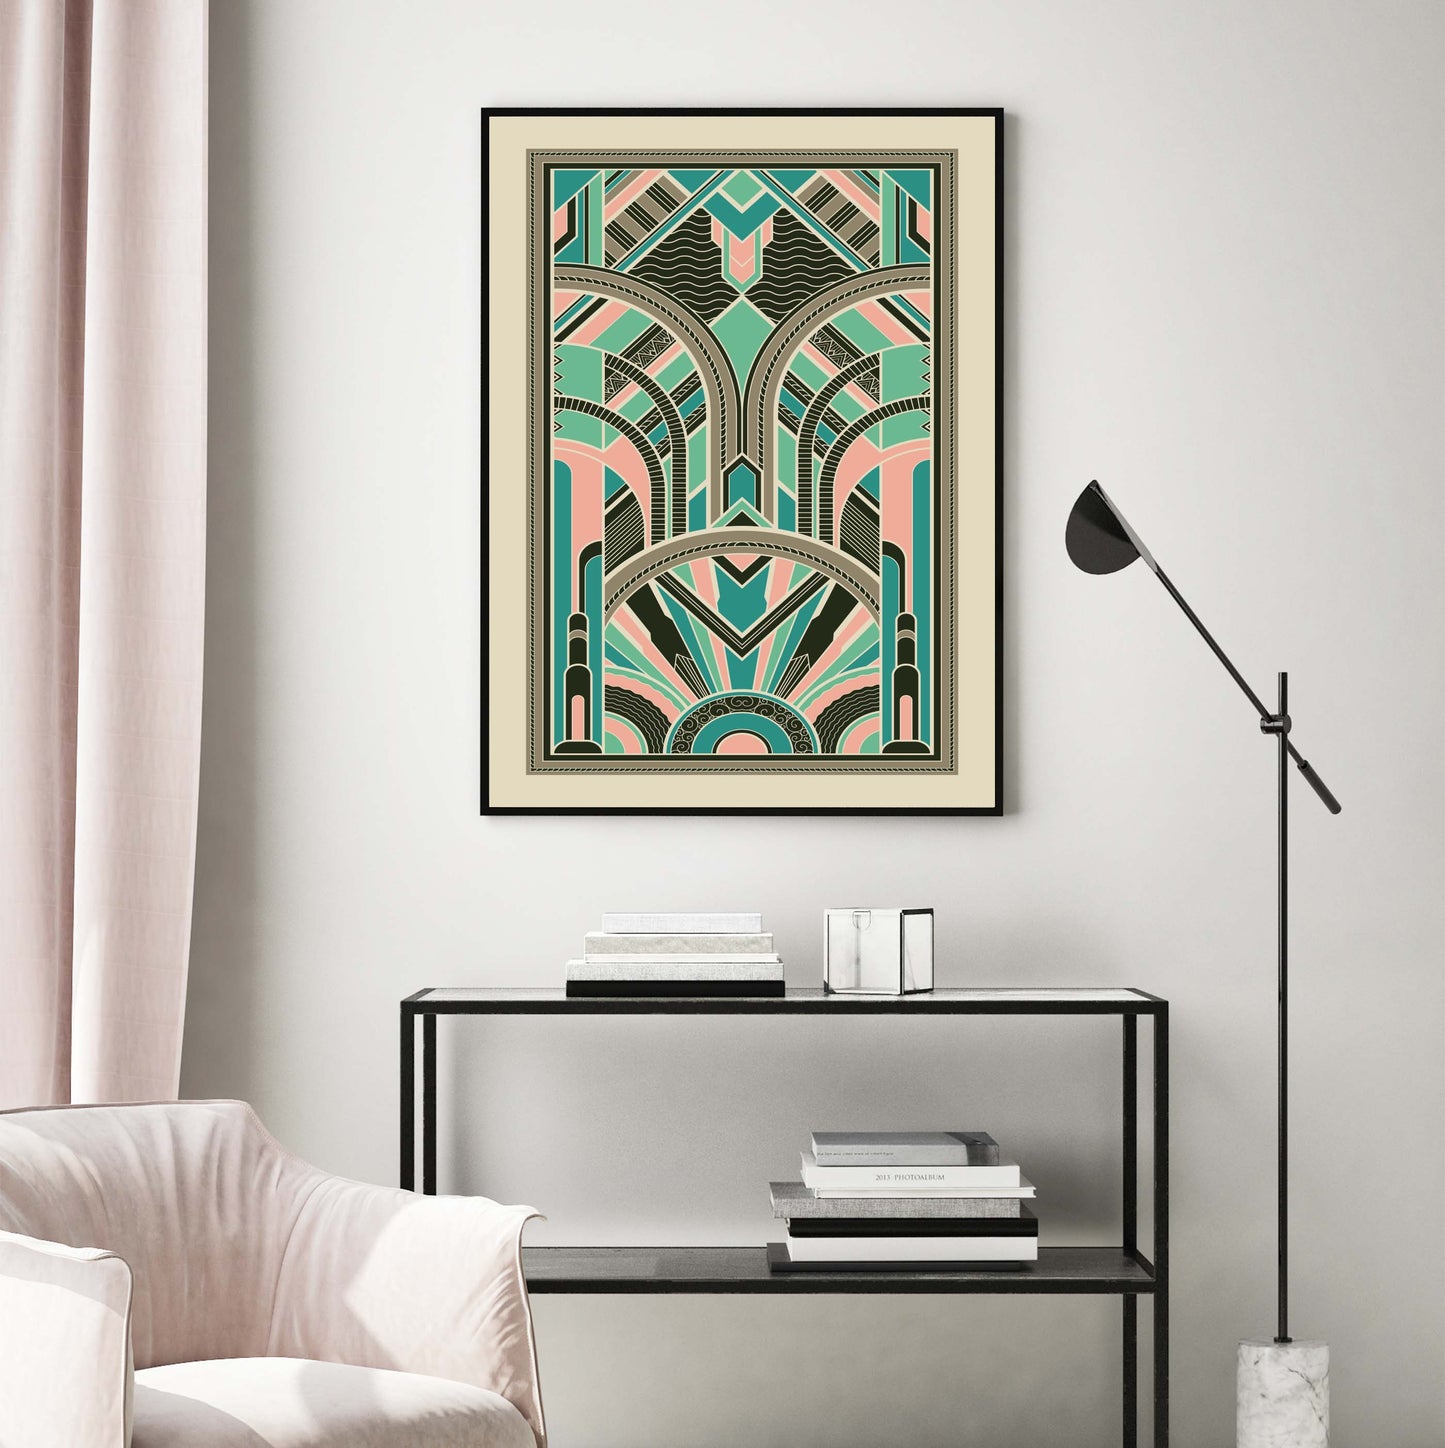 Art deco art print in pink and teal